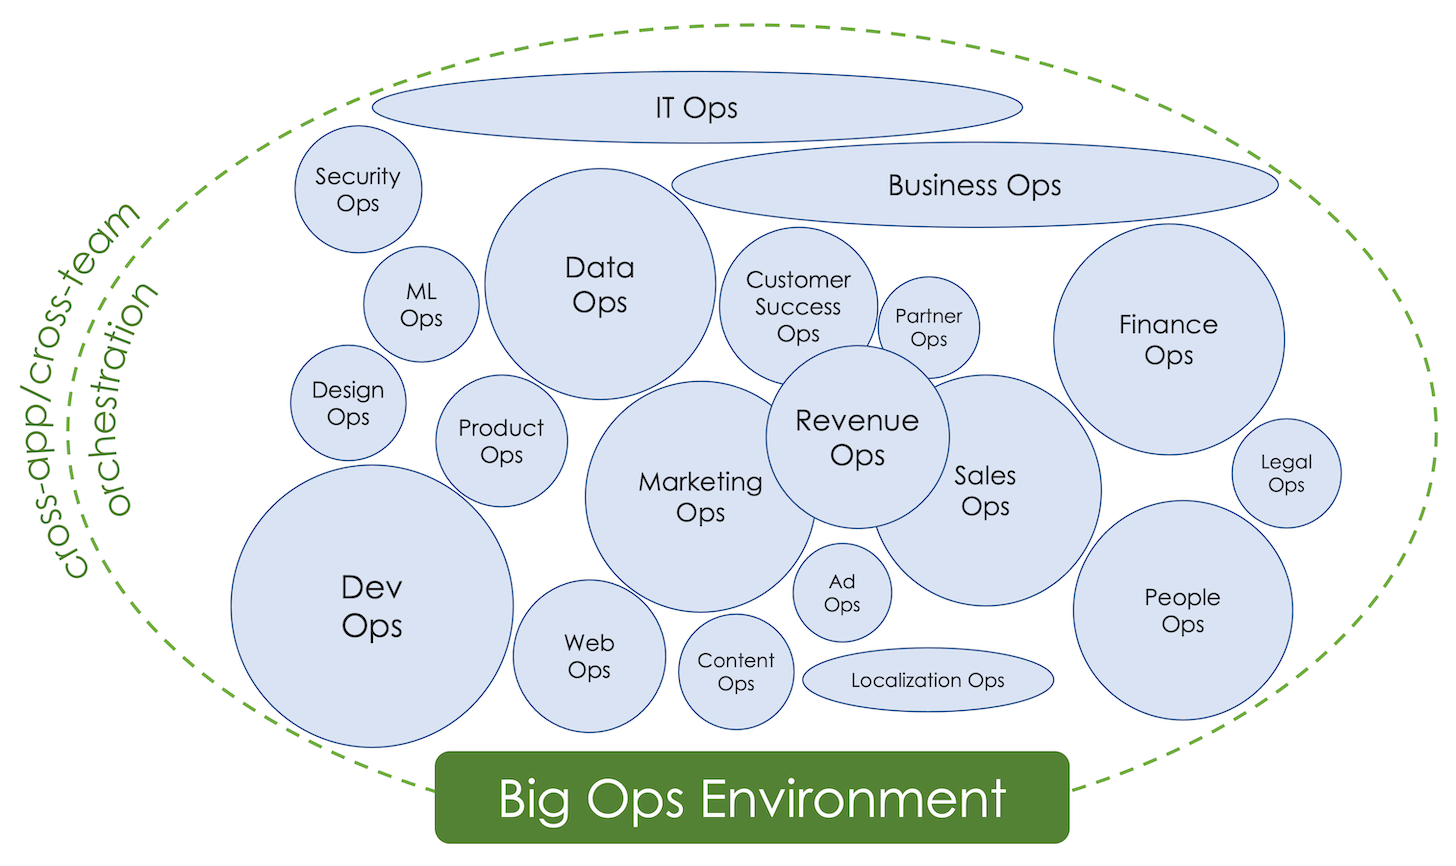 Cross-App/Cross-Team Orchestration in a Big Ops Environment